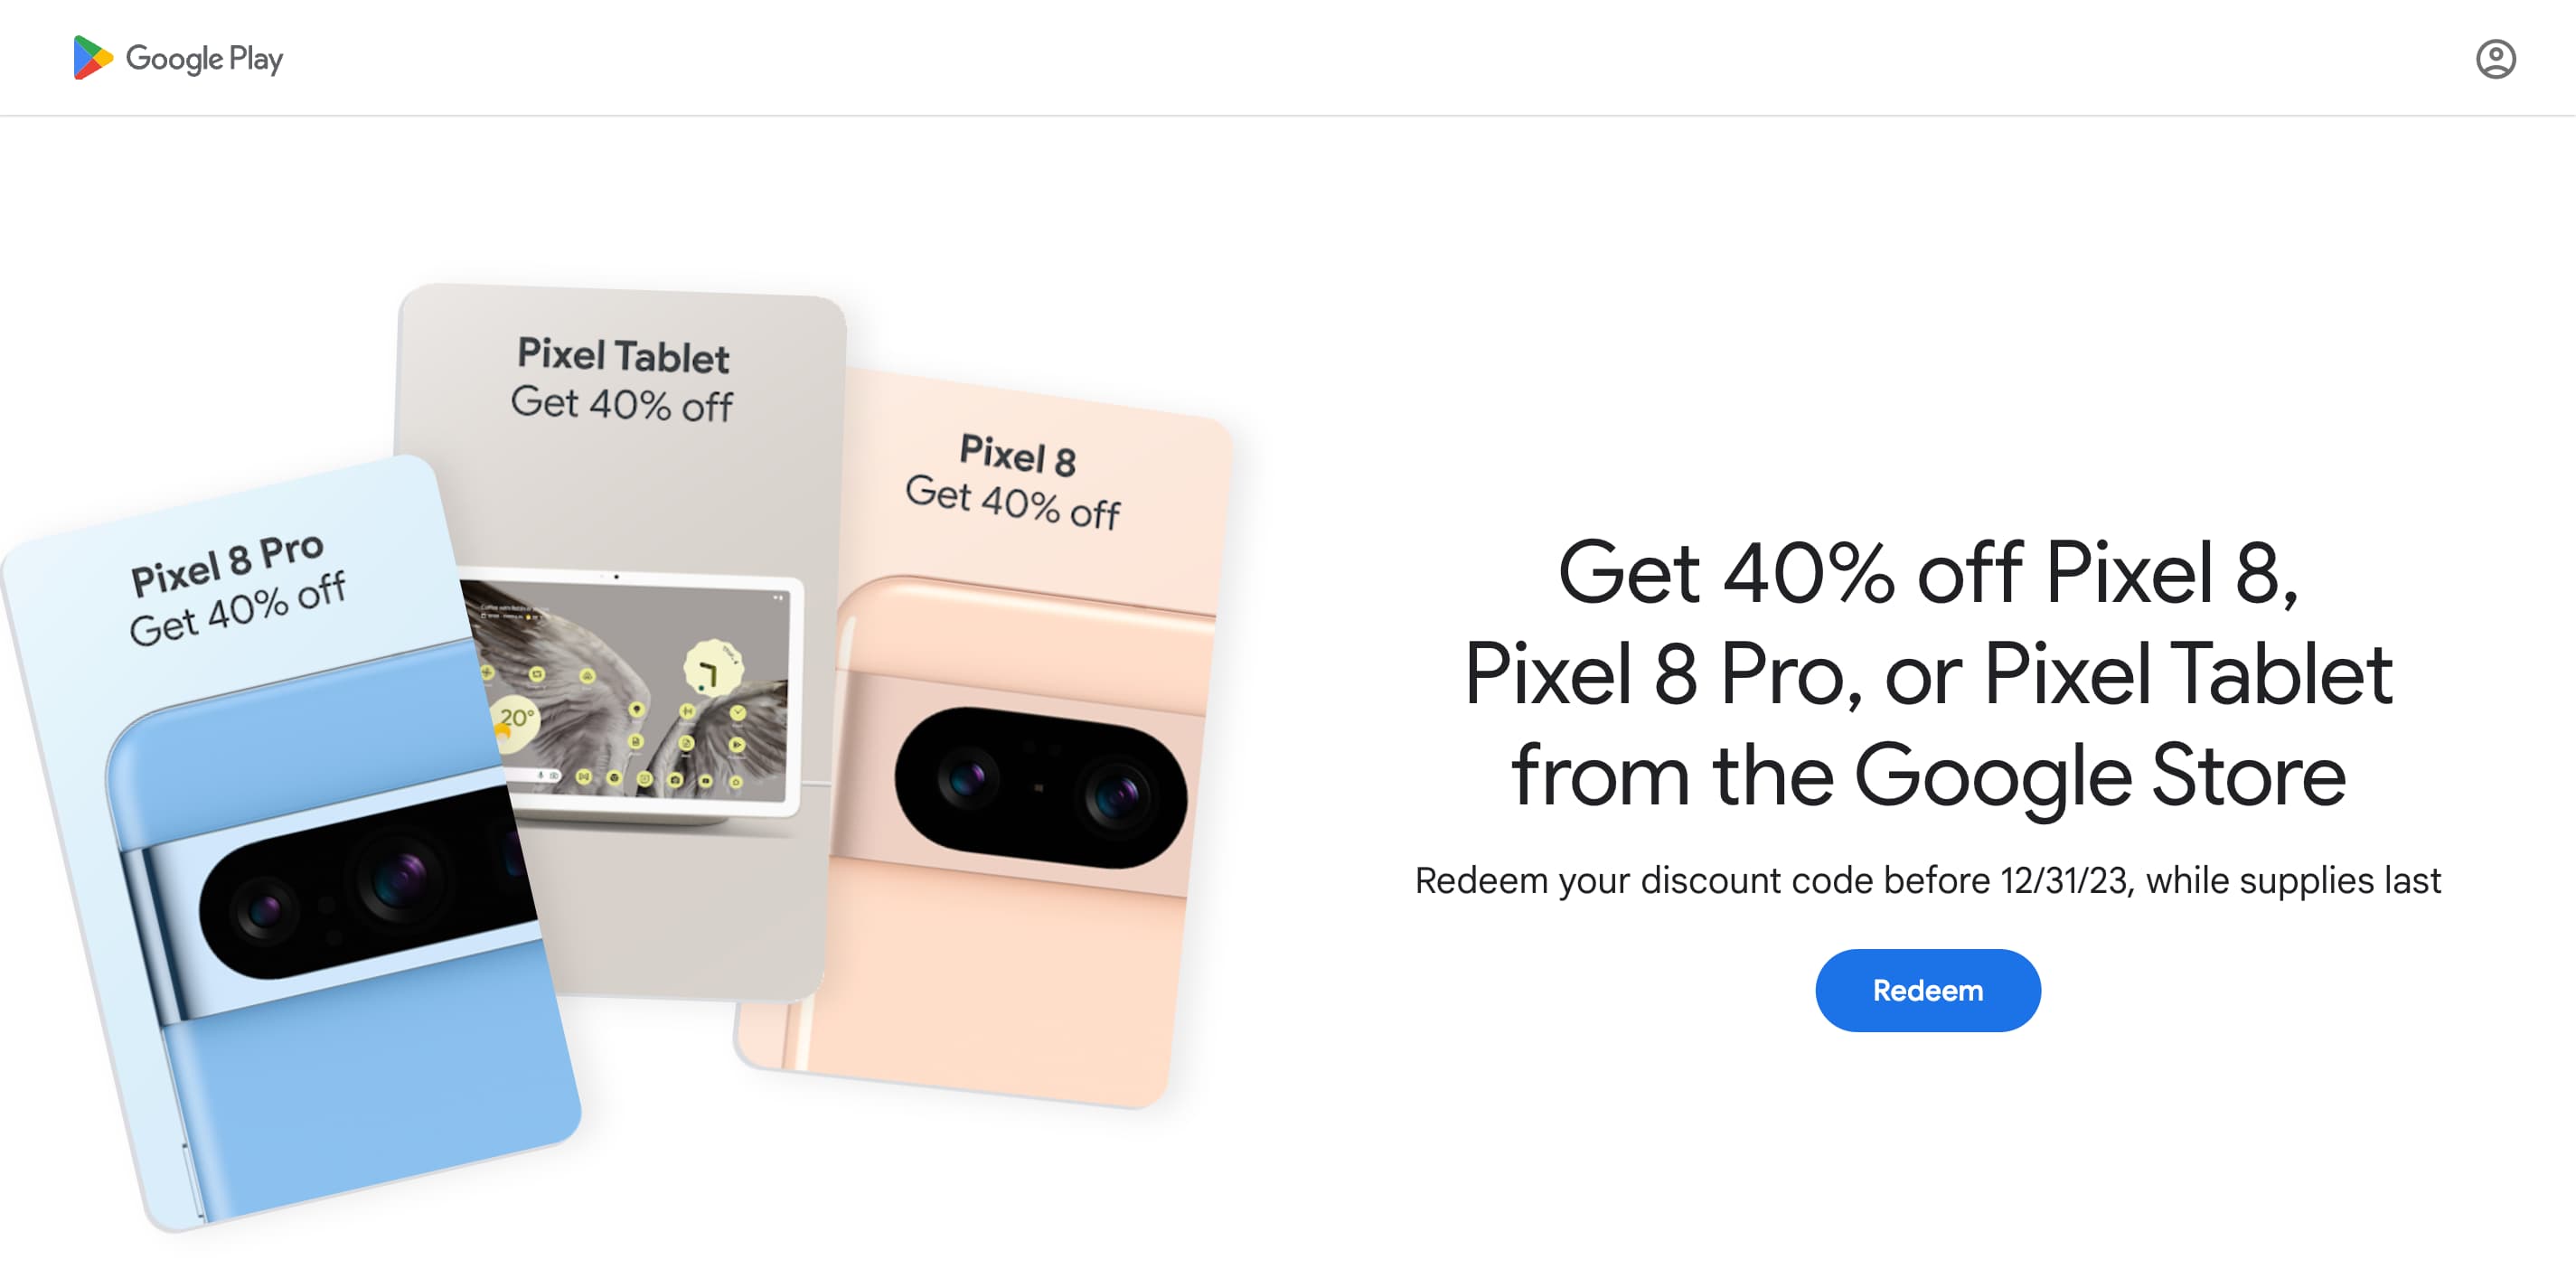 Google Play Points users get 40% off Pixel 8, 8 Pro, Tablet